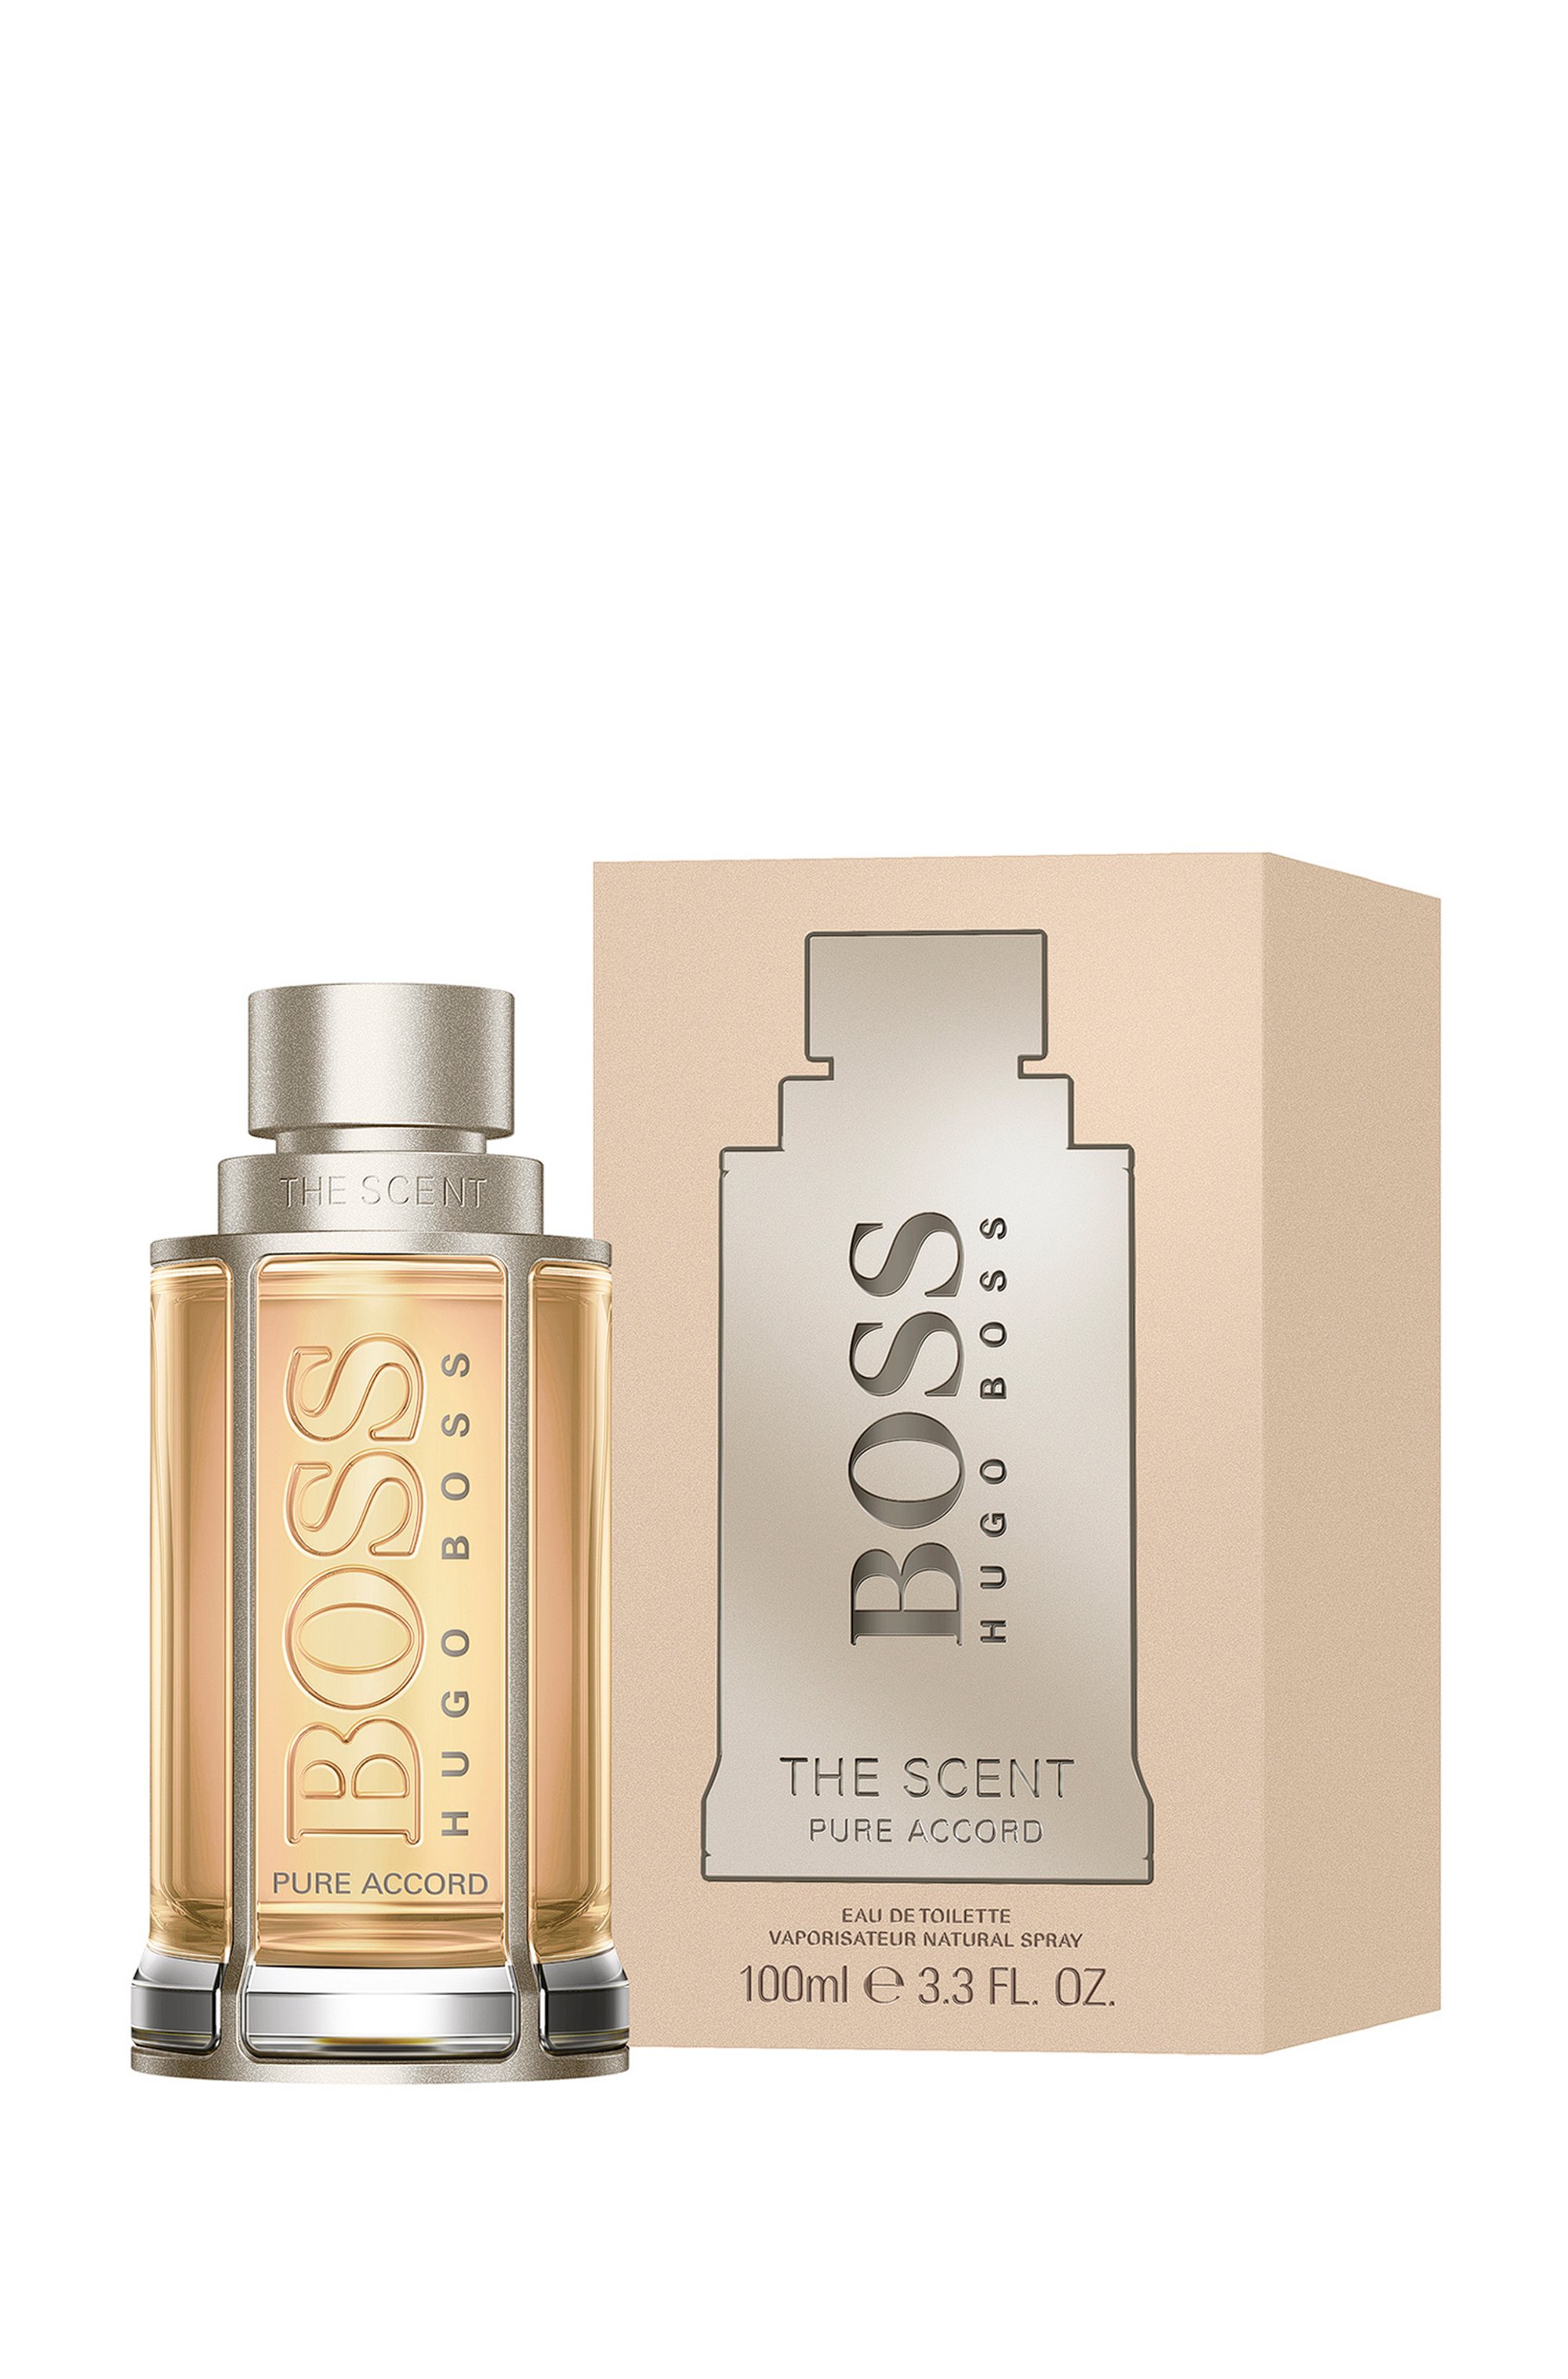 BOSS The Scent Pure Accord for Him Eau de Toilette 100 ml, Assorted-Pre-Pack